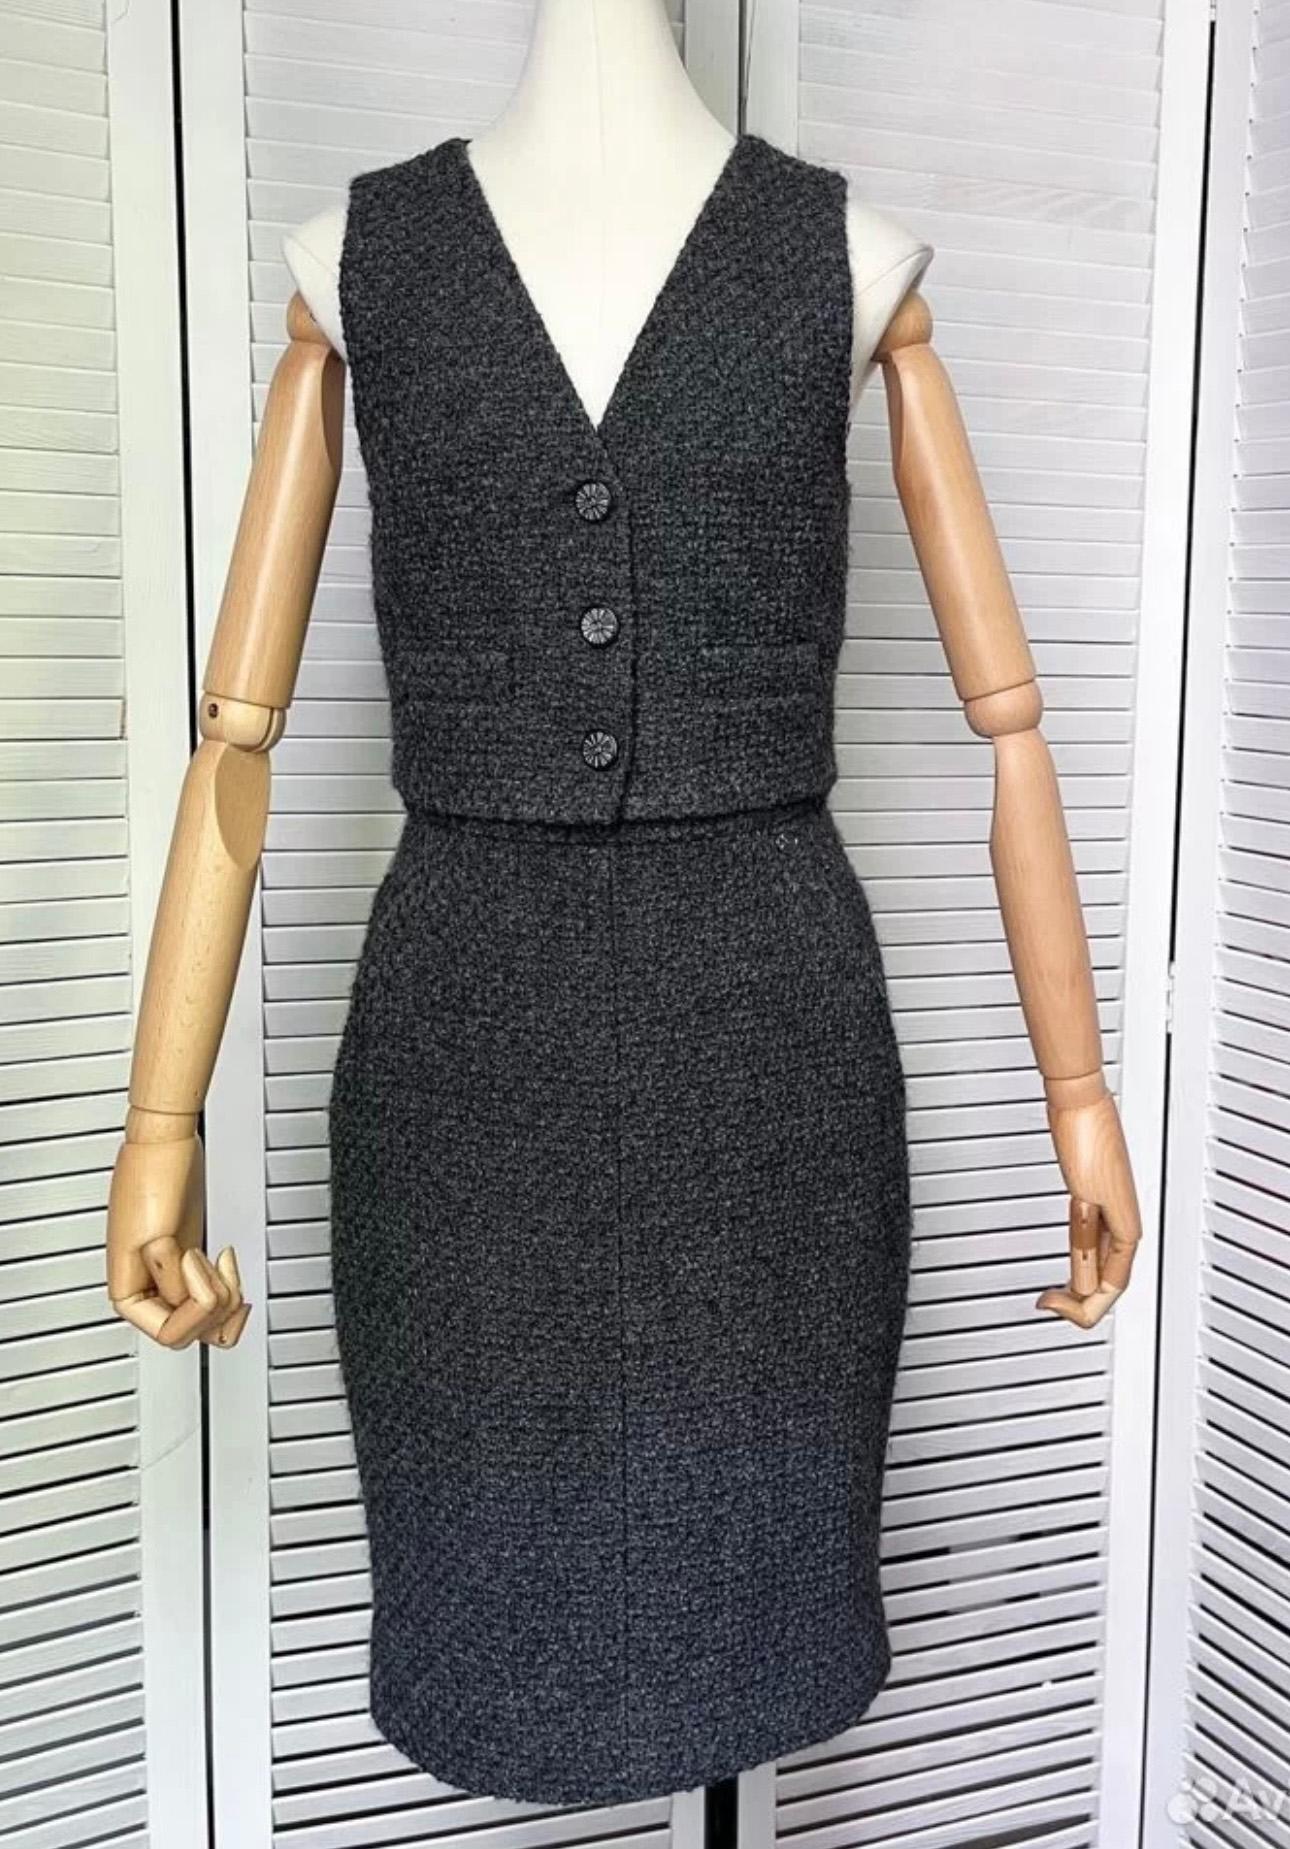 Chanel anthracite tweed suit: jacket / vest with leather detail and mid skirt.
- CC logo buttons
Size mark 36 FR. Never worn.